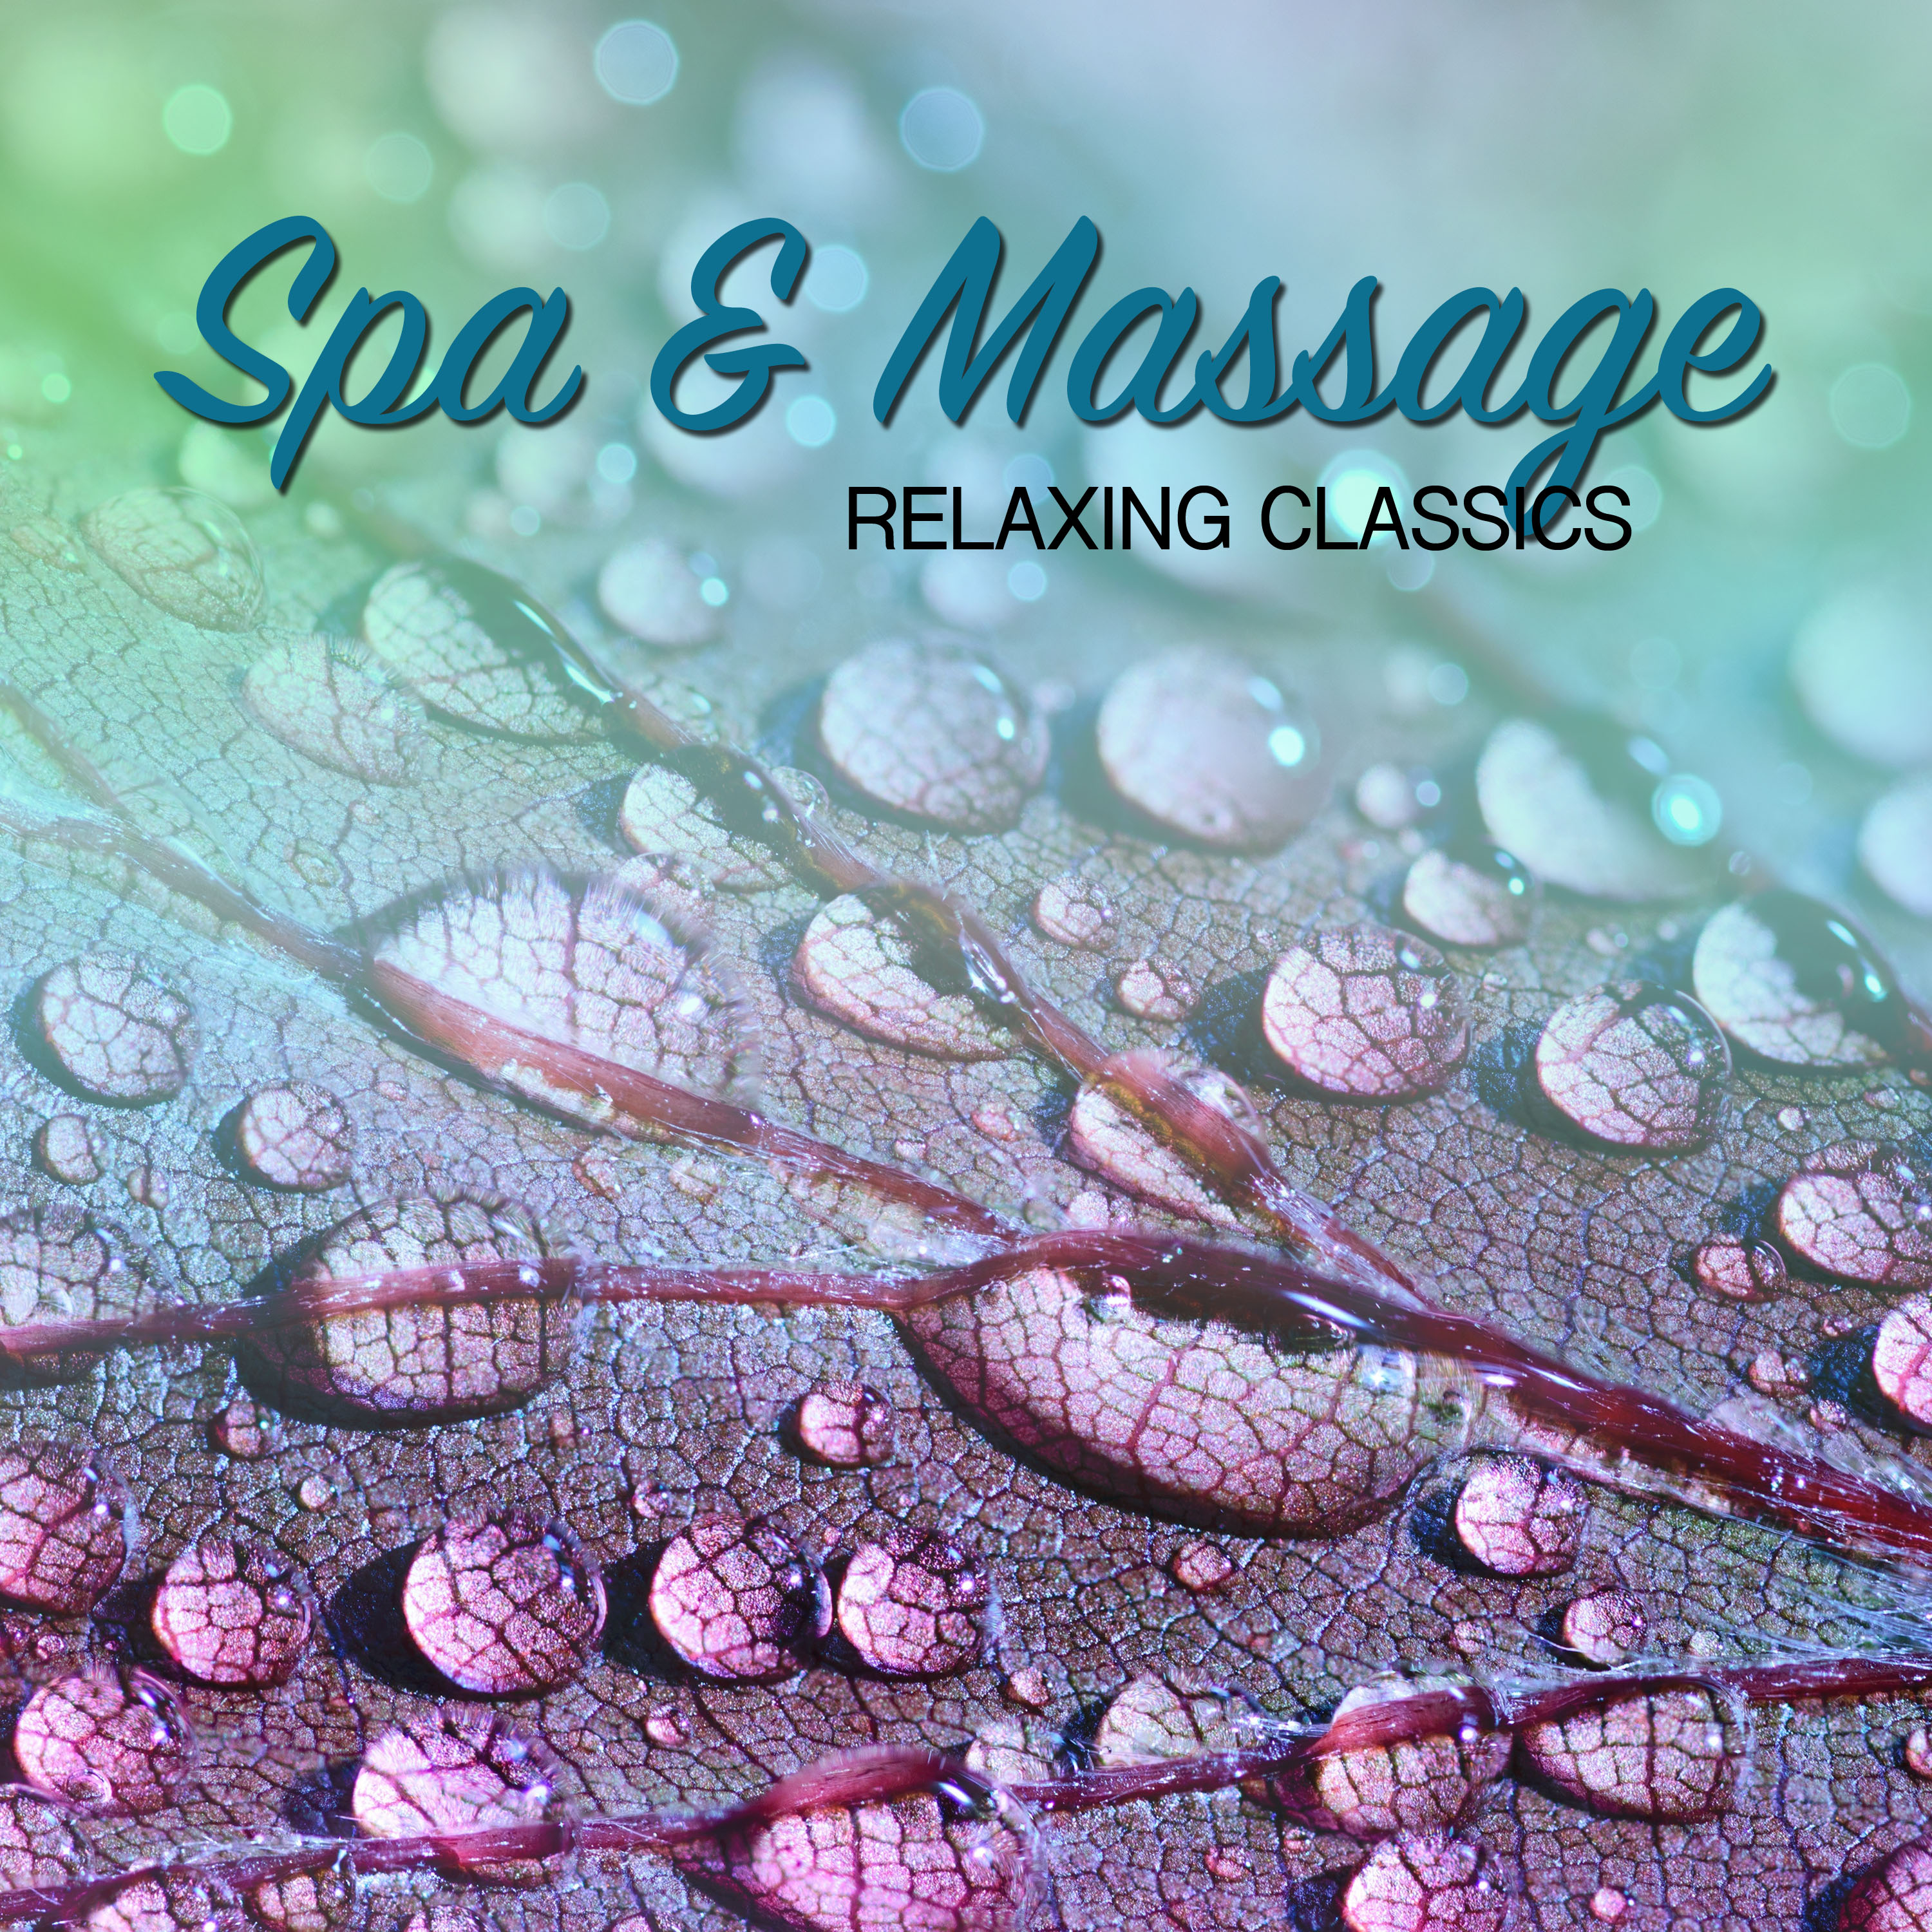 12 Relaxing Classics - Spa and Massage